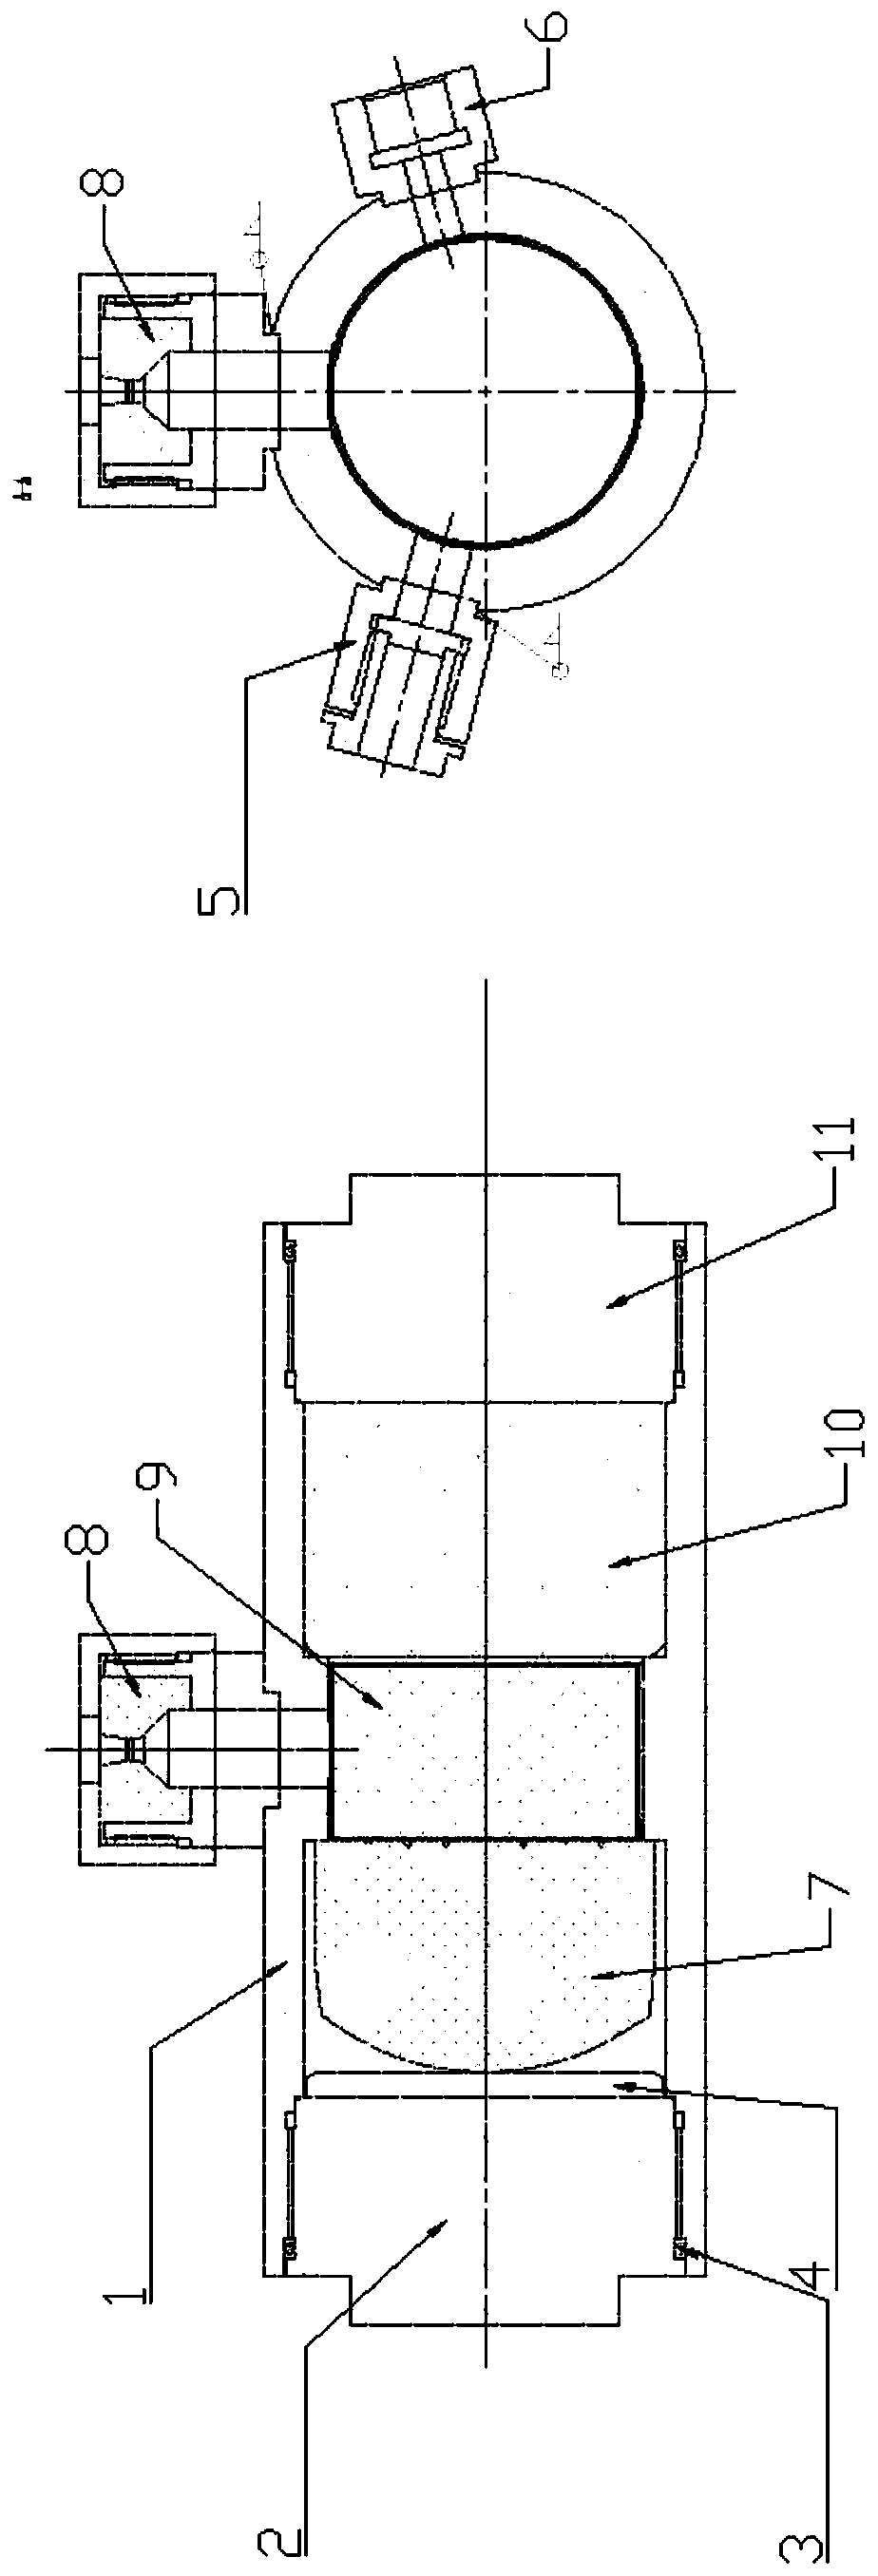 Test engine and test method for combustion of double-base system propellant in different overload directions